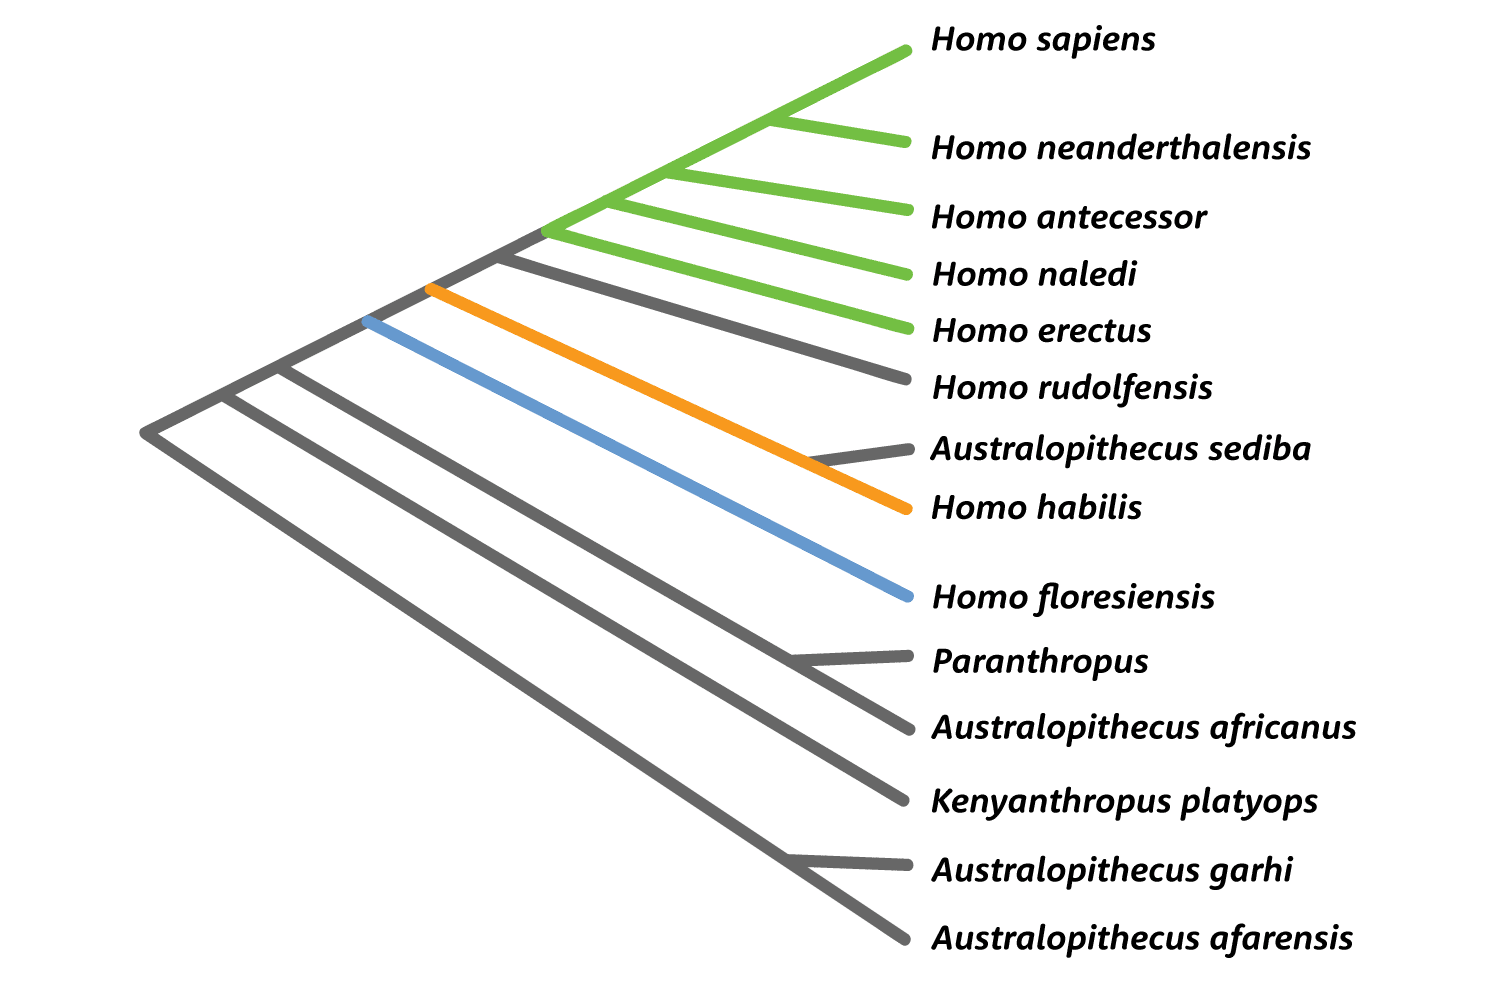 Tree of relationships of hominins showing a branch with all Homo species and Australopithecus sediba as a sister to a branch with Paranthropus and Australopithecus africanus